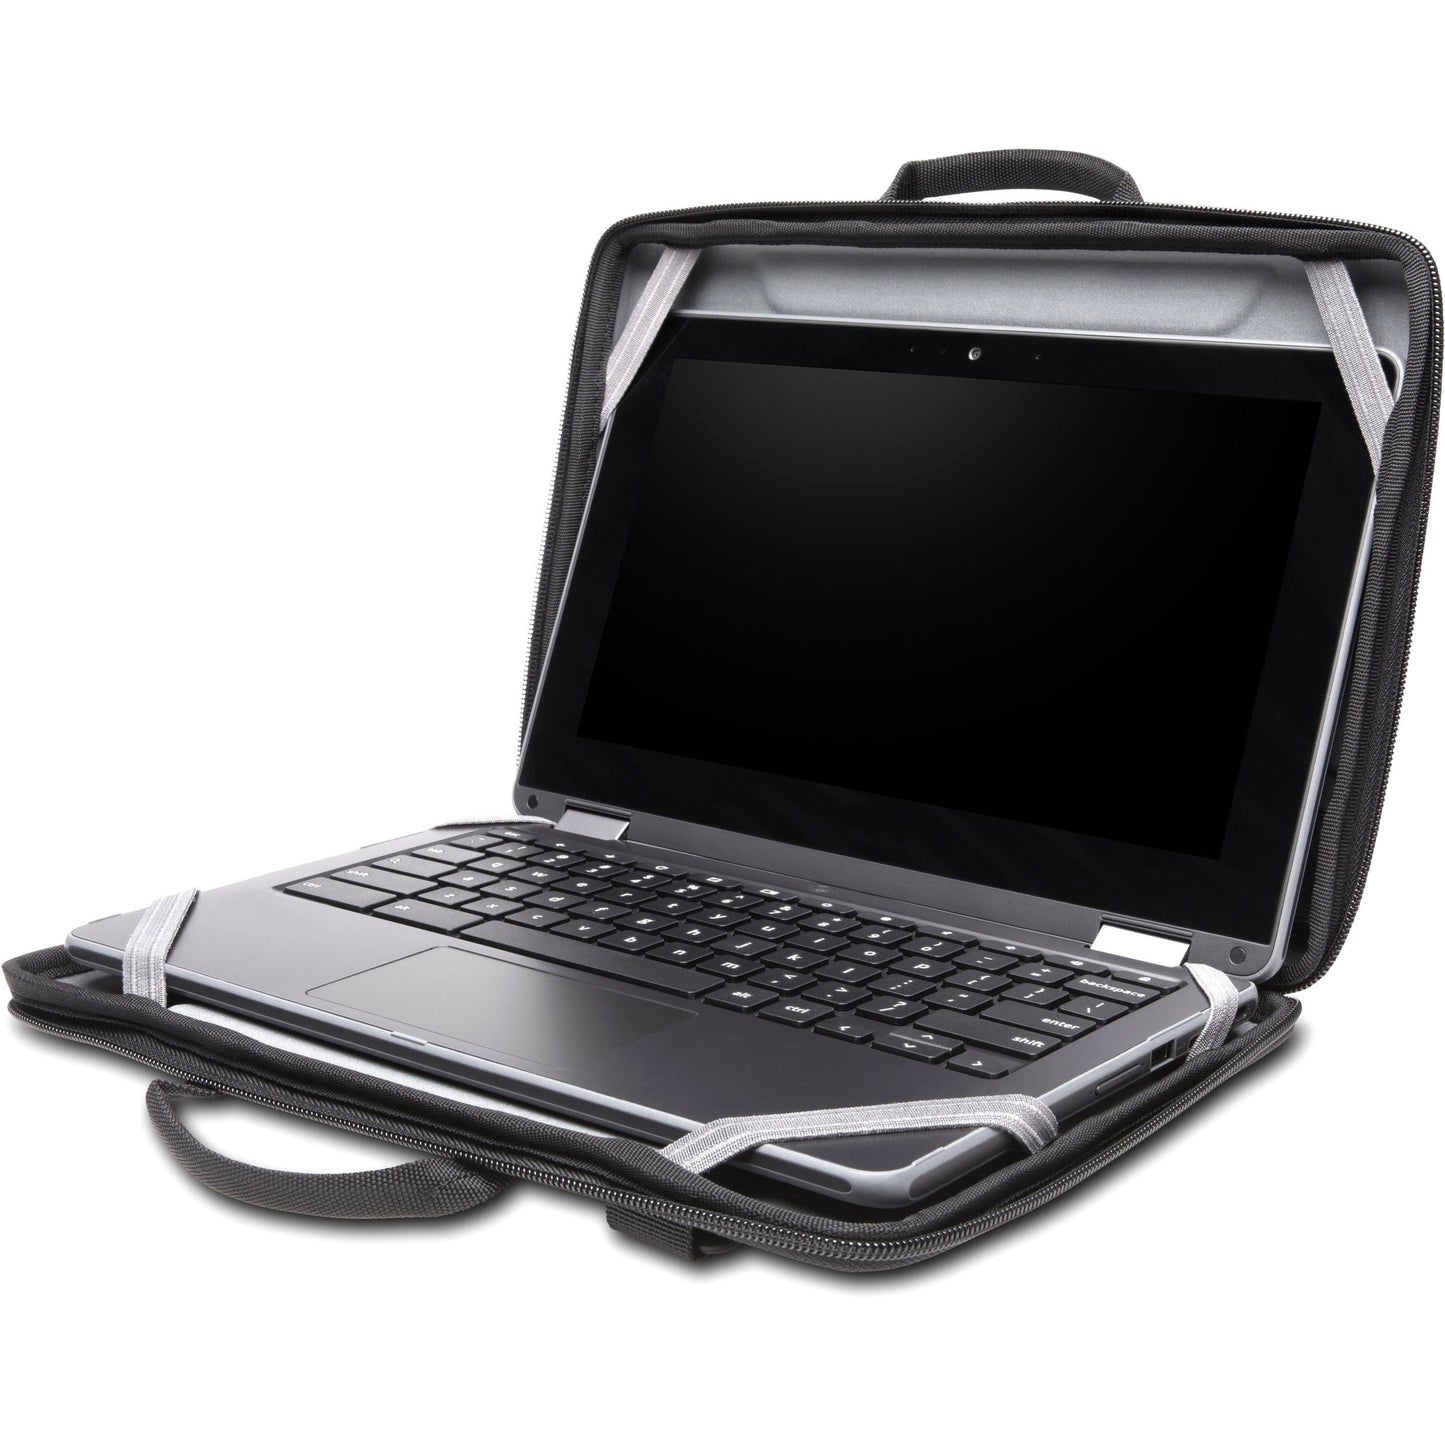 Kensington Stay-on K62550WW Carrying Case for 14" Notebook Chromebook - Black